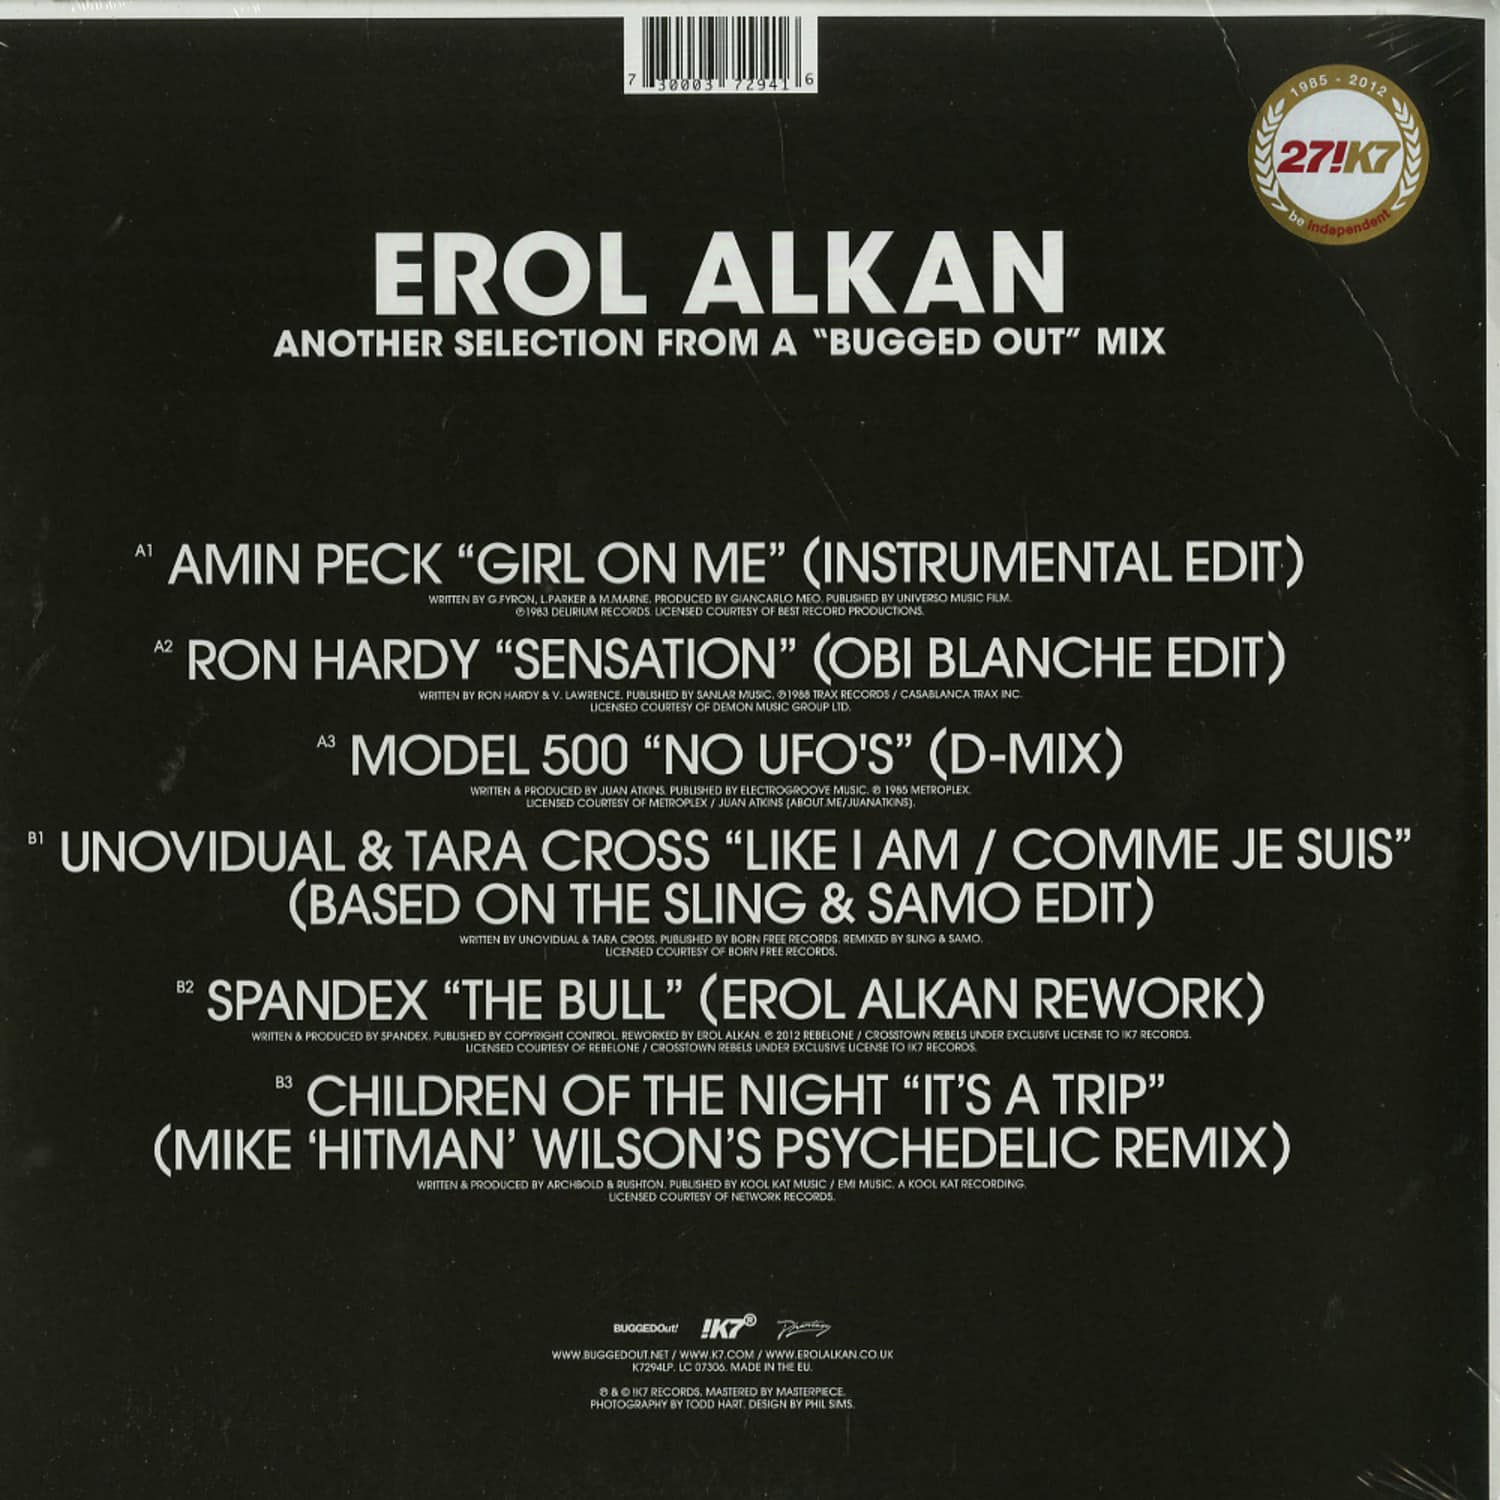 Erol Alkan - ANOTHER BUGGED IN & OUT MIX